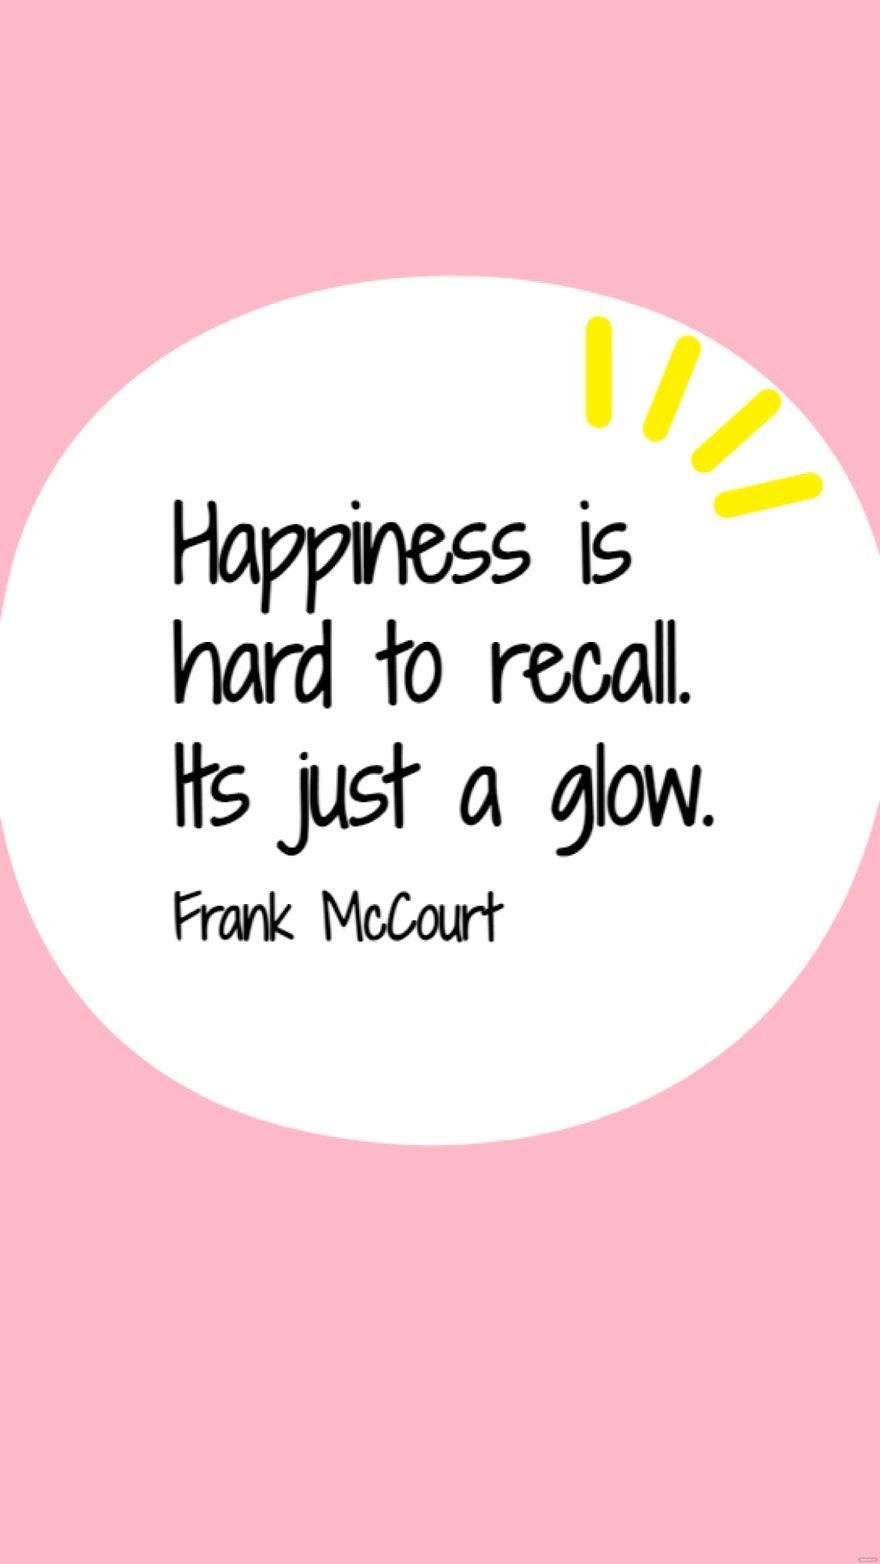 Frank McCourt - Happiness is hard to recall. Its just a glow. in JPG